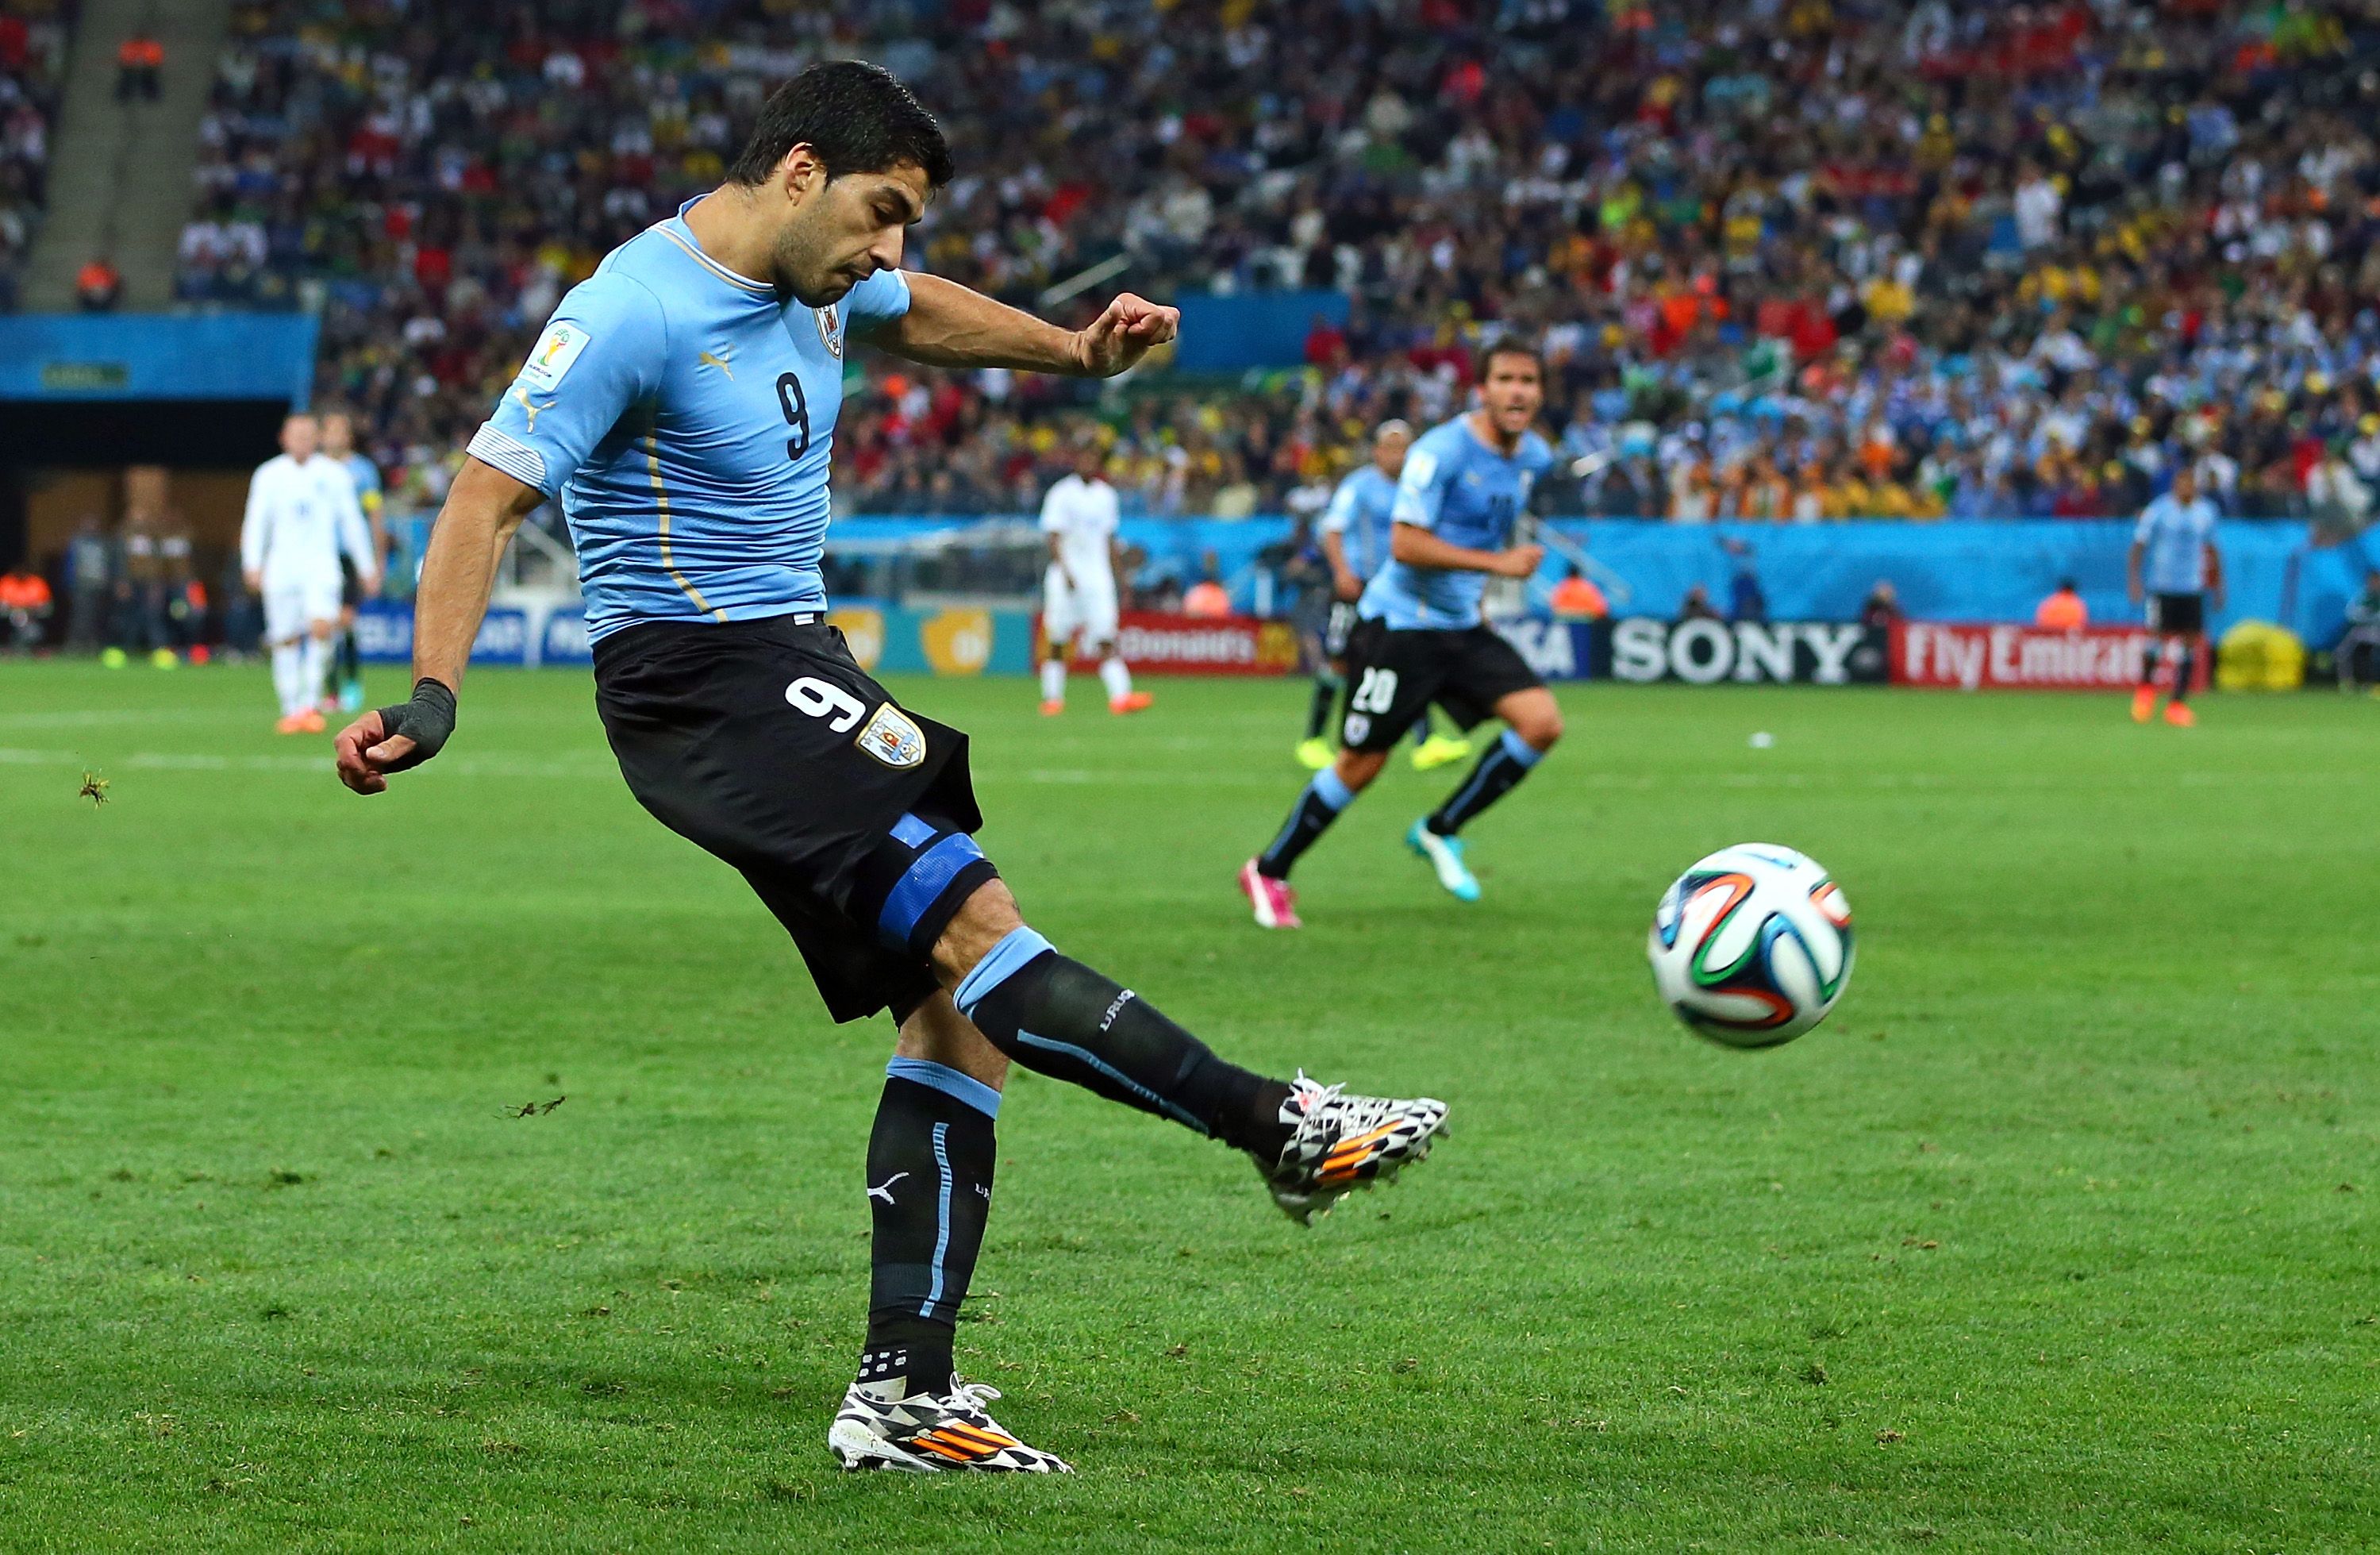 SAO PAULO, BRAZIL - JUNE 19: Luis Suarez of Uruguay kicks the ball during the 2014 FIFA World Cup Brazil Group D match between Uruguay and England at Arena de Sao Paulo on June 19, 2014 in Sao Paulo, Brazil. (Photo by Kevin C. Cox/Getty Images)